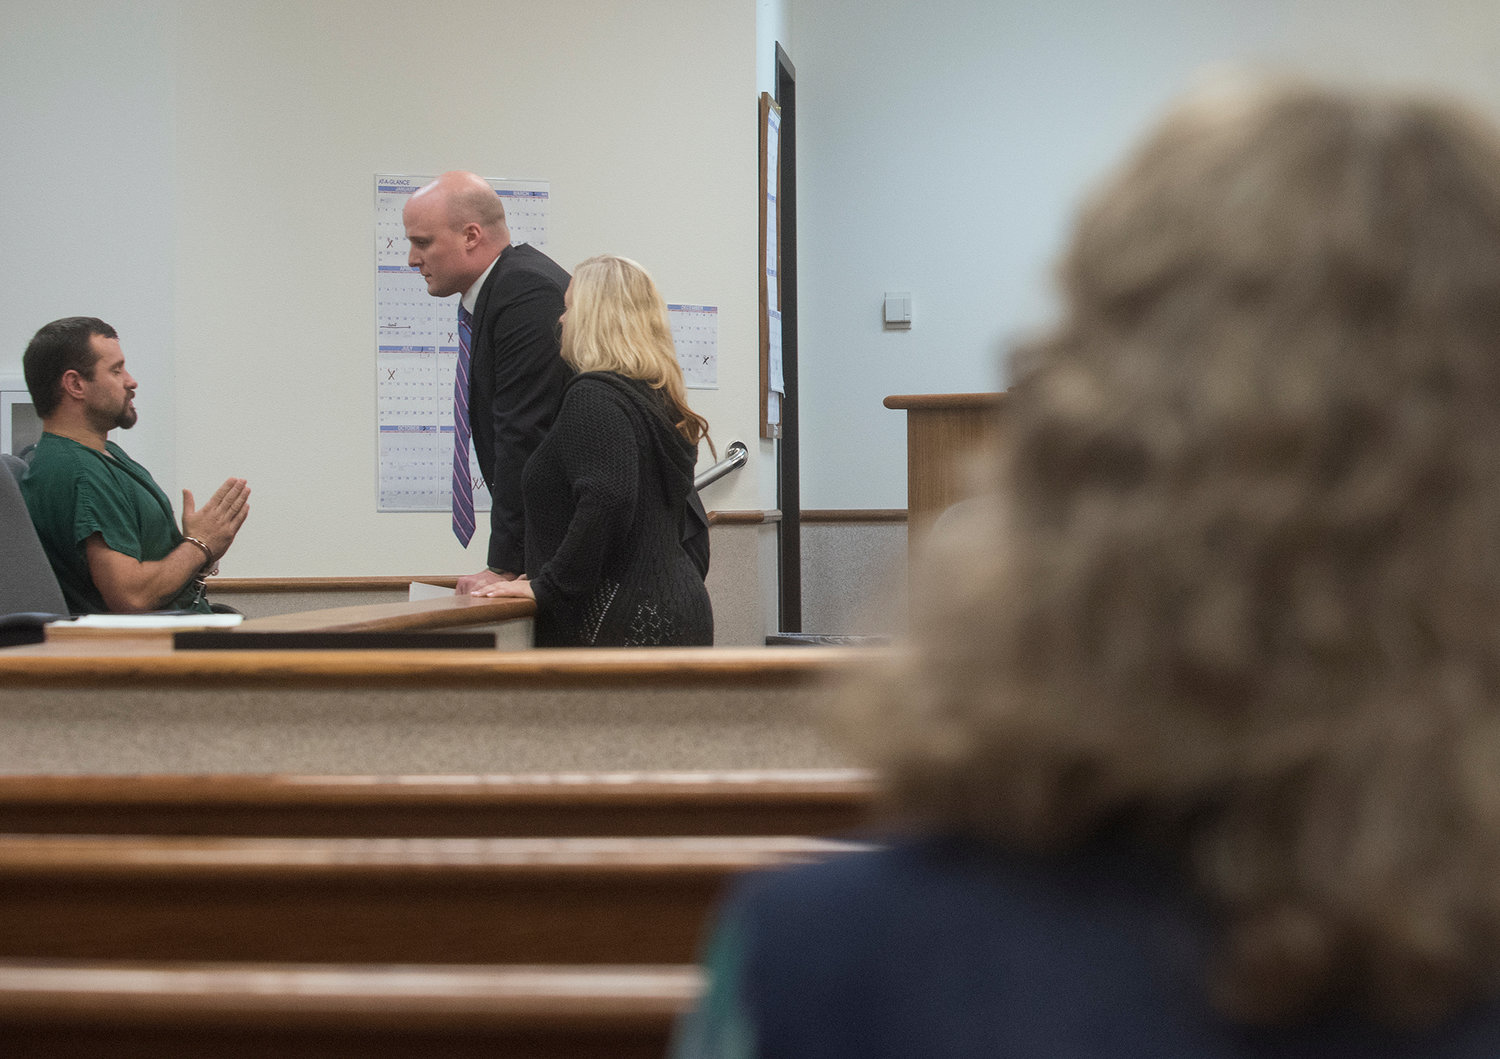 James W. McMillion, left, talks with his attorney, Brian Gerhart, as a court-appointed sign-language interpreter looks on while McMillion's mother, Gail Goodwin, right, sits in the gallery of a Lewis County Superior Court room on Wednesday afternoon prior to the start of McMillion's change-of-plea hearing at the Lewis County Law and Justice Center in Chehalis.